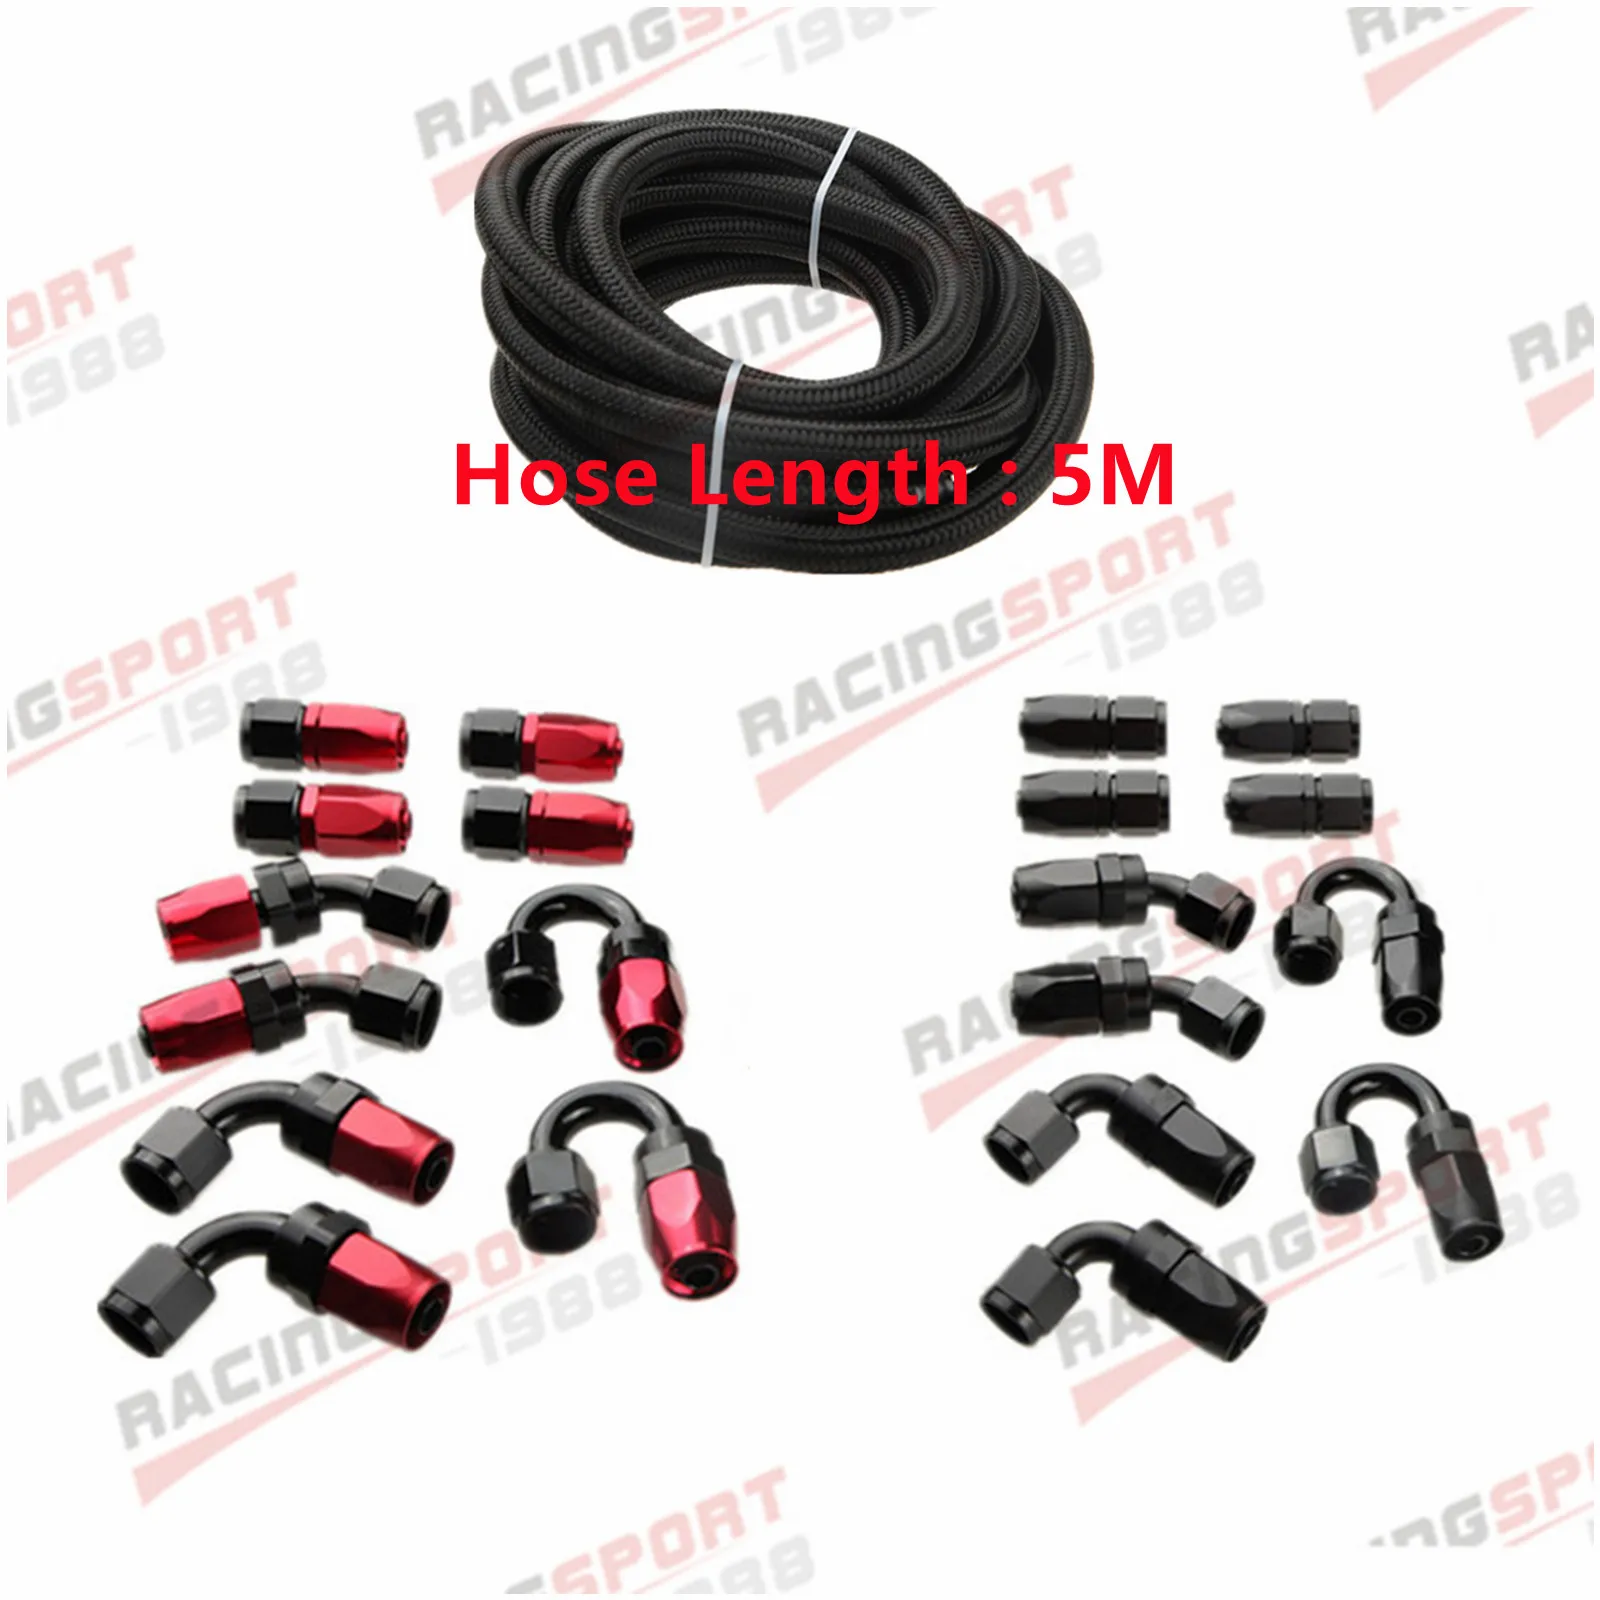 

3M/5M 6AN AN6 Black Braided Oil Fuel Fittings Hose End 0+45+90+180 Degree Oil Adaptor Kit Oil Fuel Hose Line With Clamps